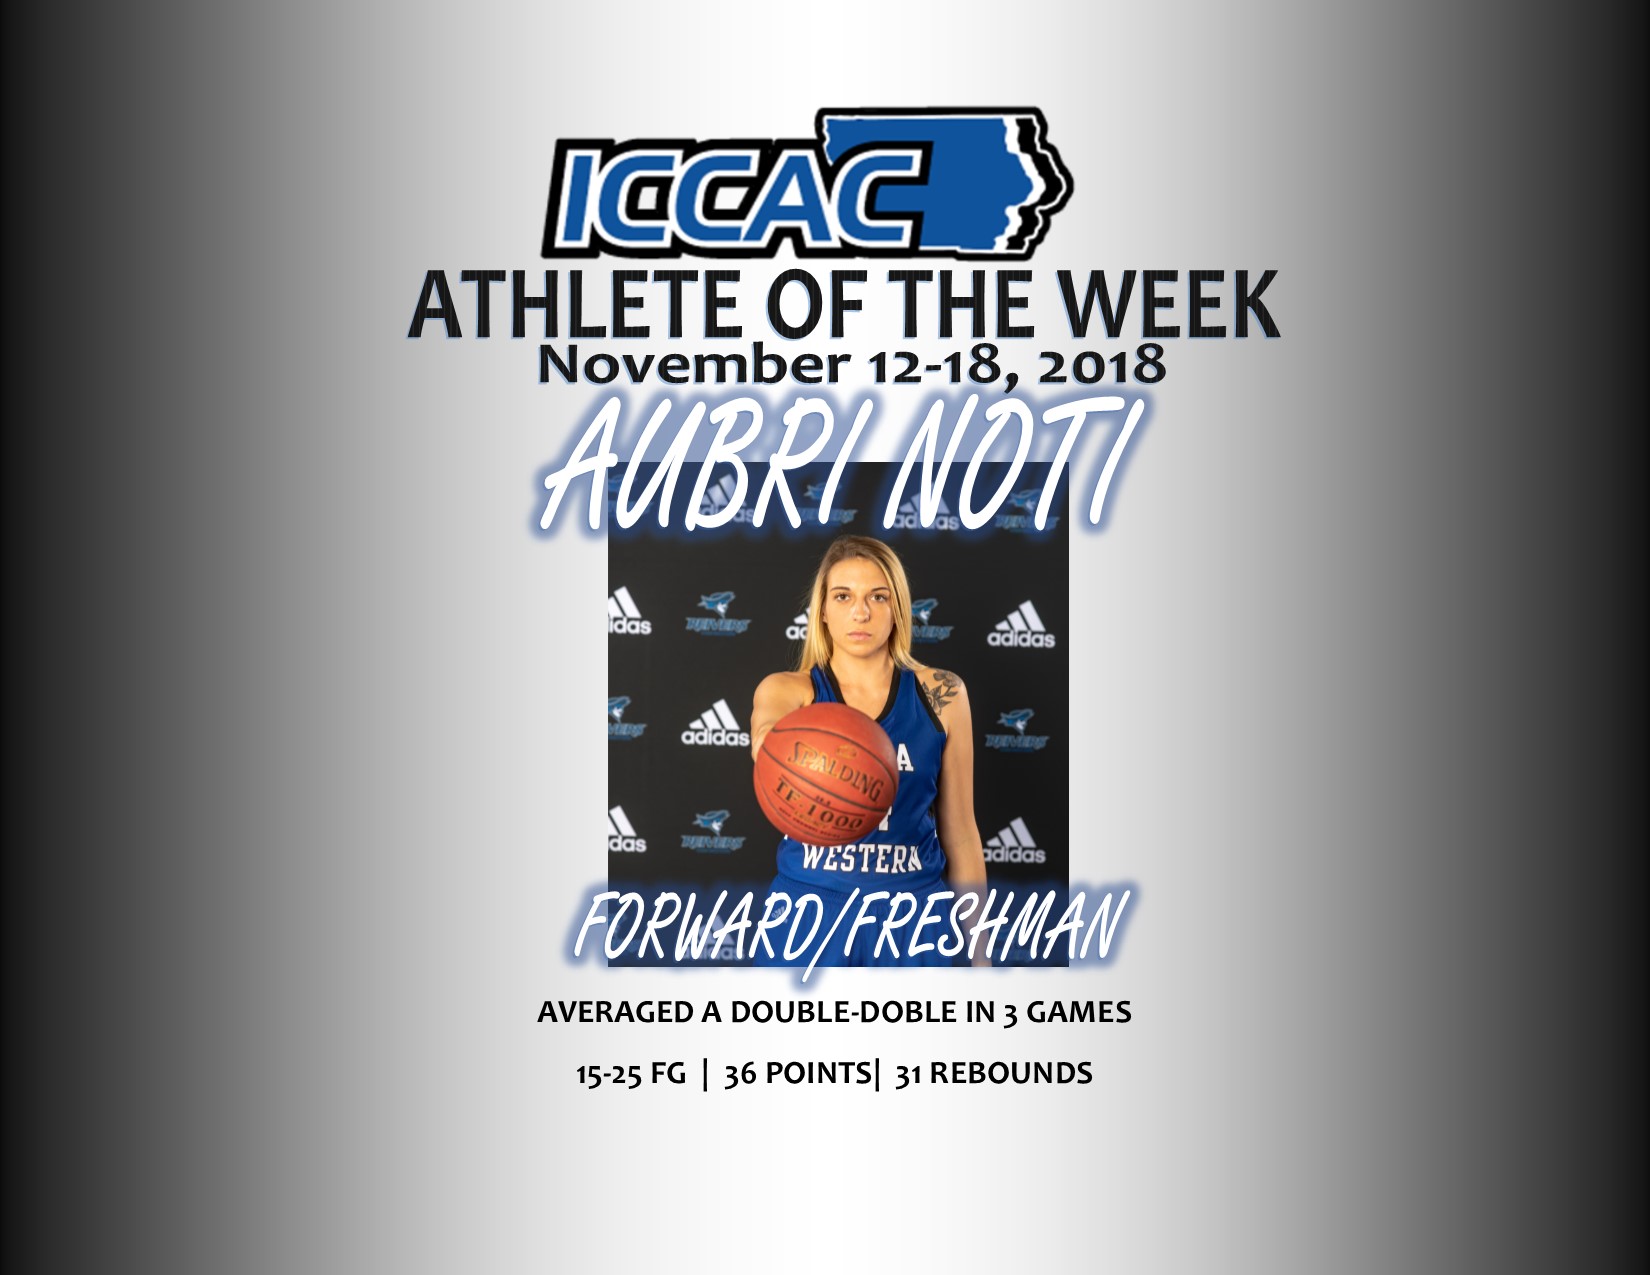 Noti selected as ICCAC Player of the Week